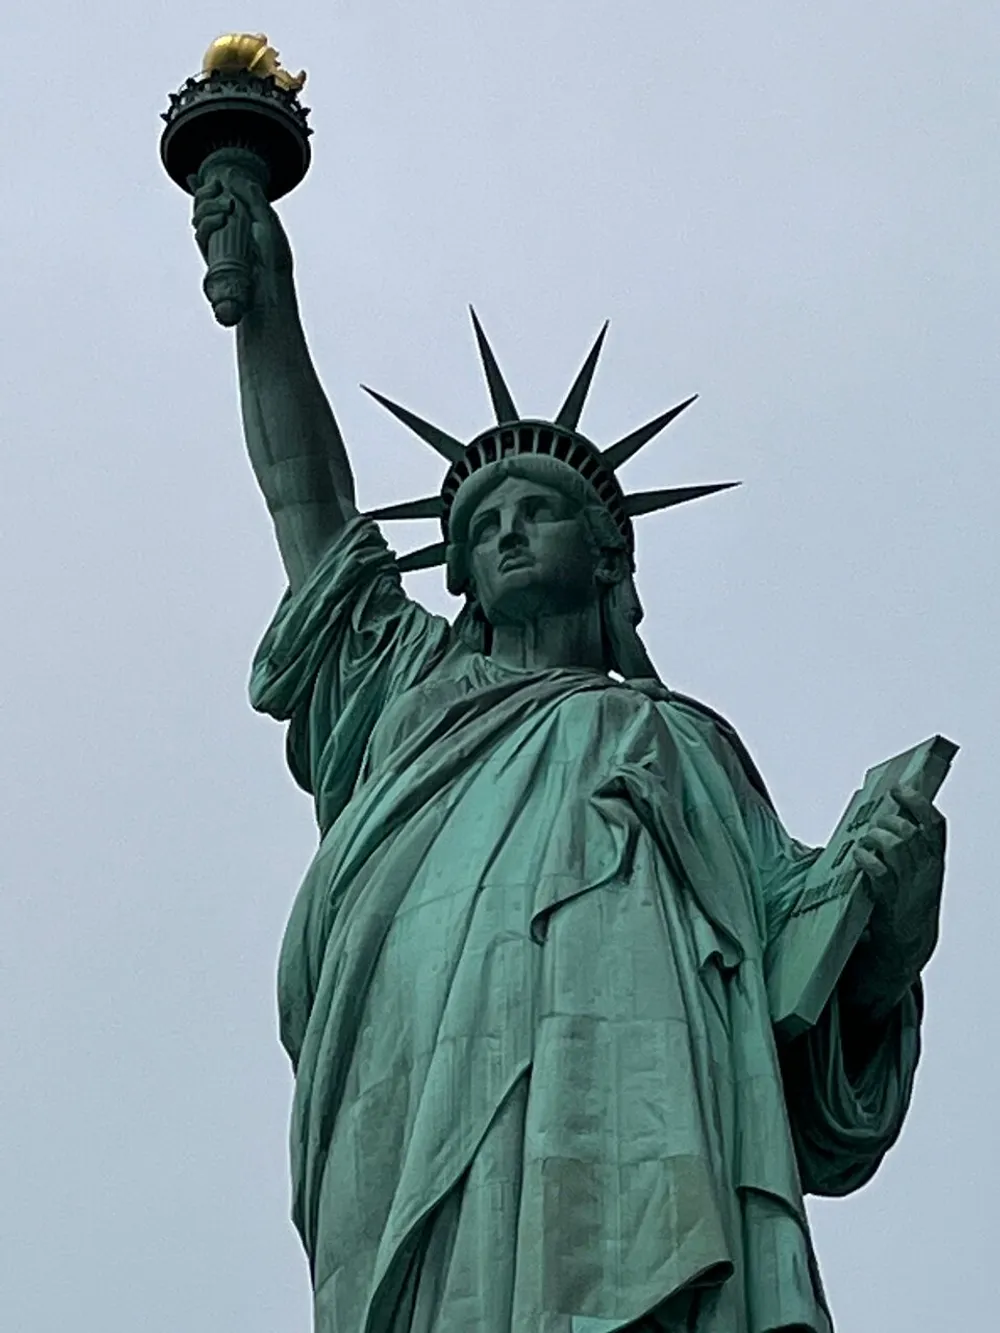 The image is a close-up of the Statue of Liberty against a clear sky highlighting the iconic torch and crown